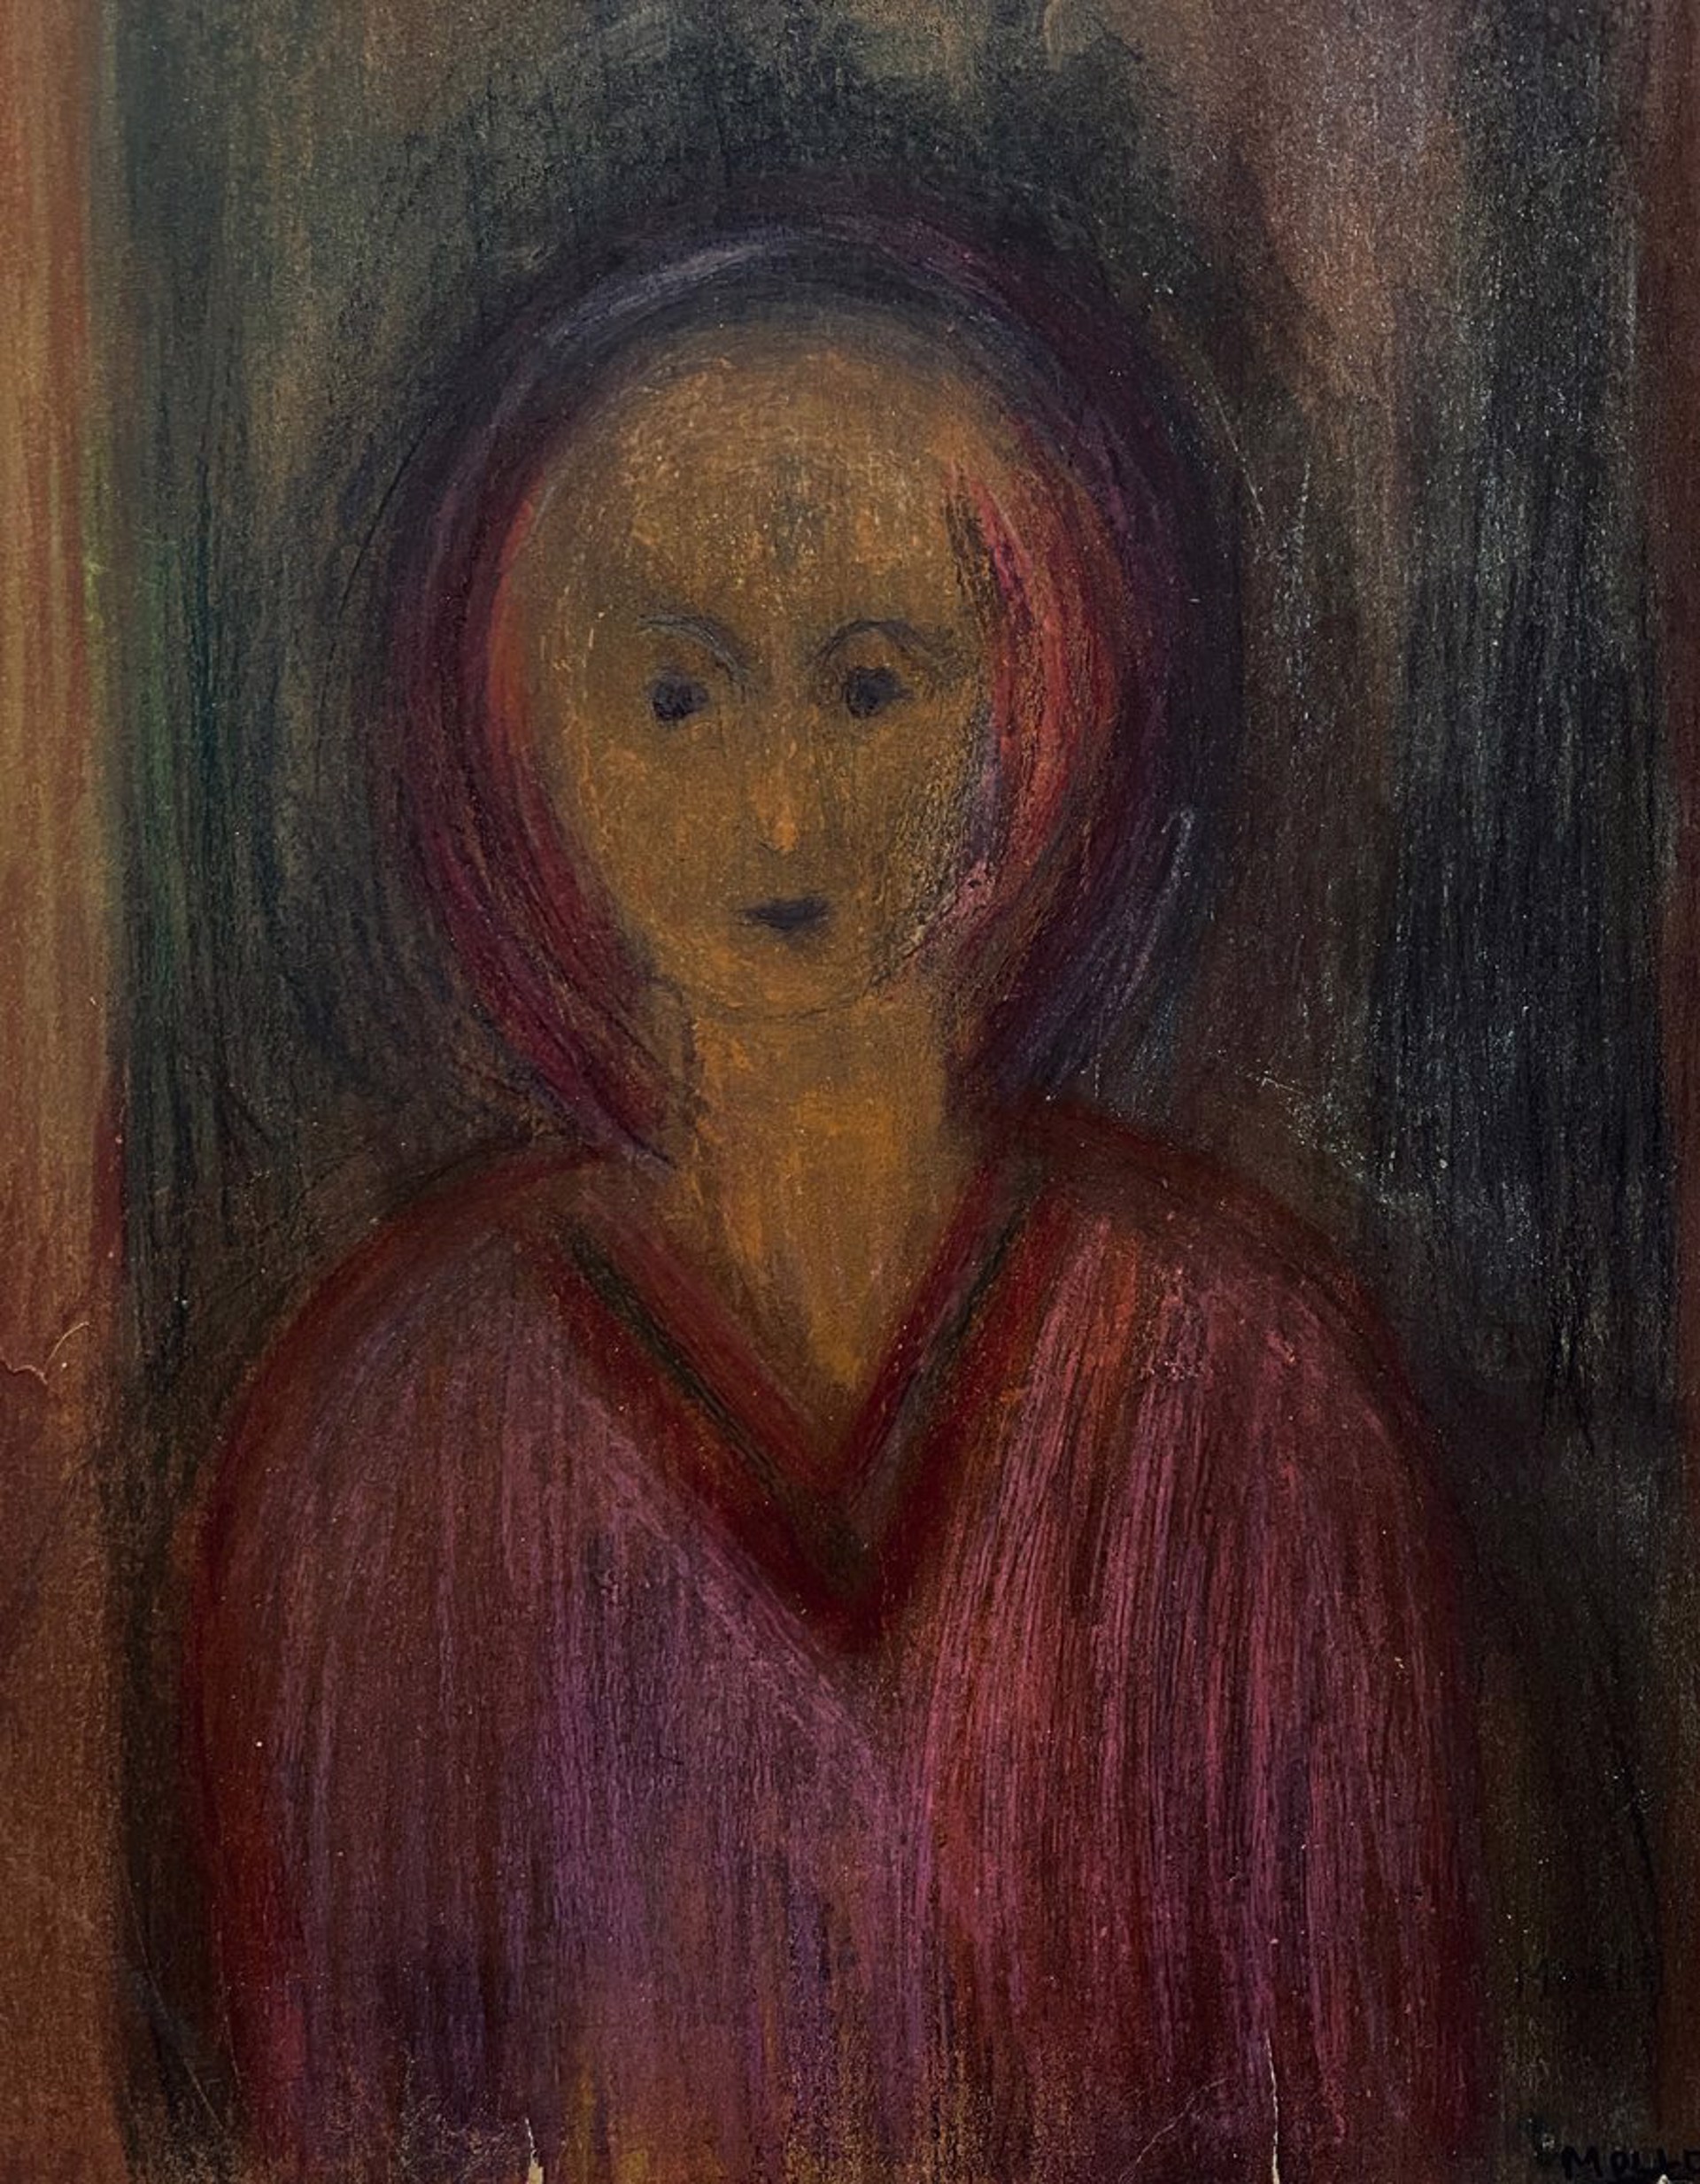 Untitled (figure with halo) by Molla Moss